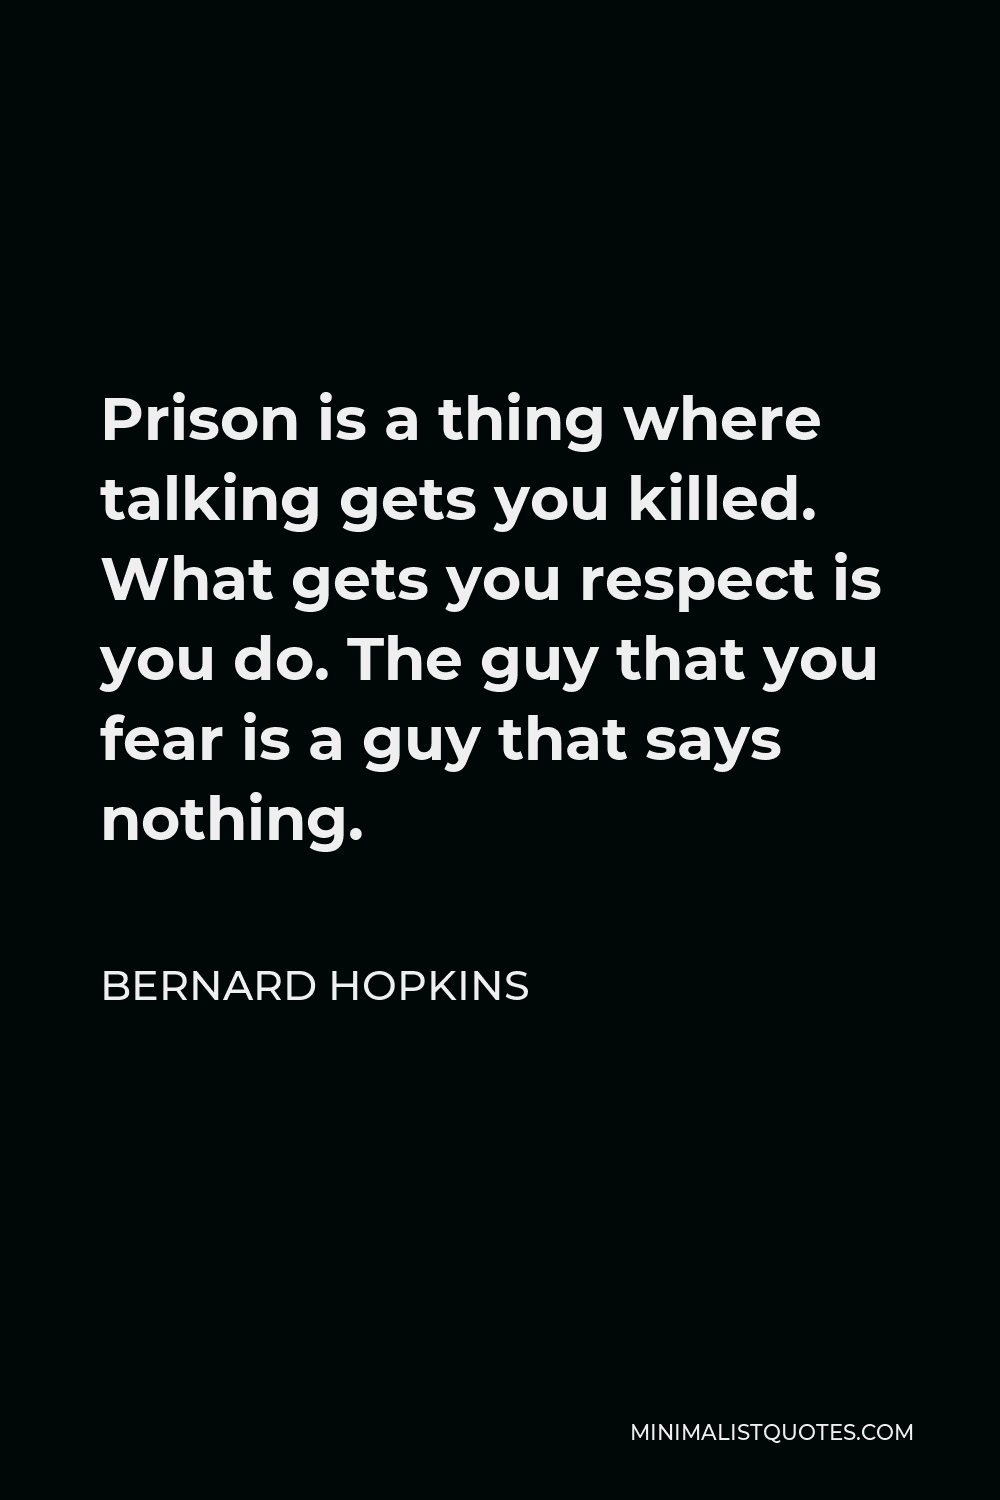 Bernard Hopkins Quote - Prison is a thing where talking gets you killed. What gets you respect is you do. The guy that you fear is a guy that says nothing.